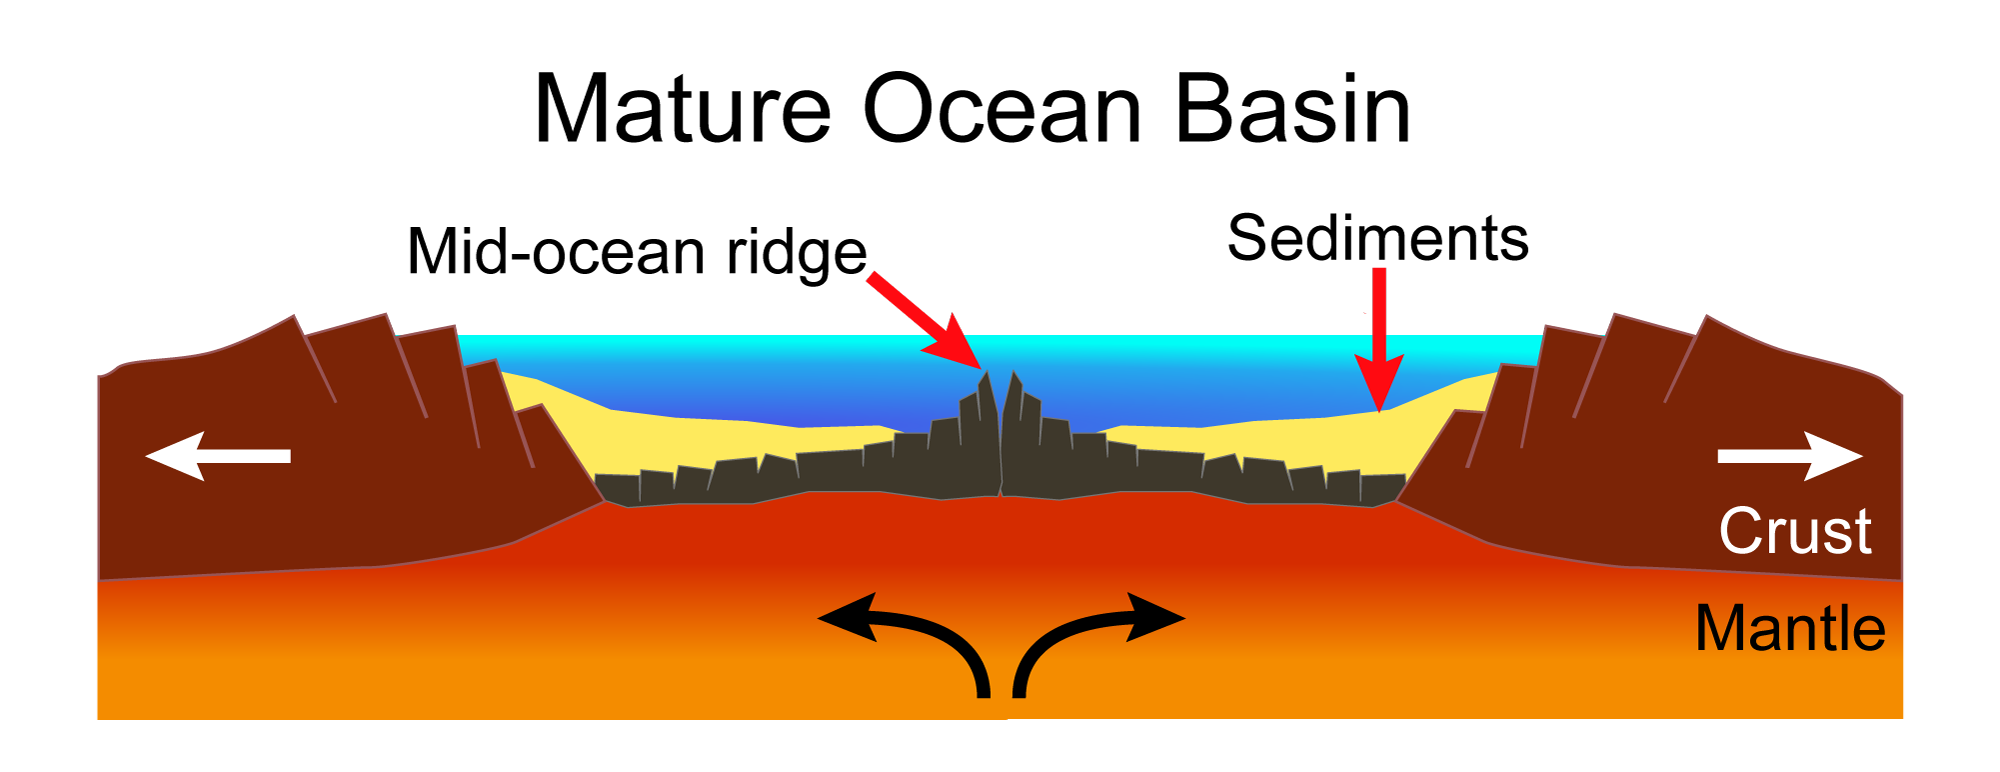 Diagram of a mature ocean basin. In this diagram, the continents are far apart and moving away from each other. A spreading center or Mid-ocean ridge is in the center of the ocean forming new ocean crust. Sediments accumulate on the ocean floor.